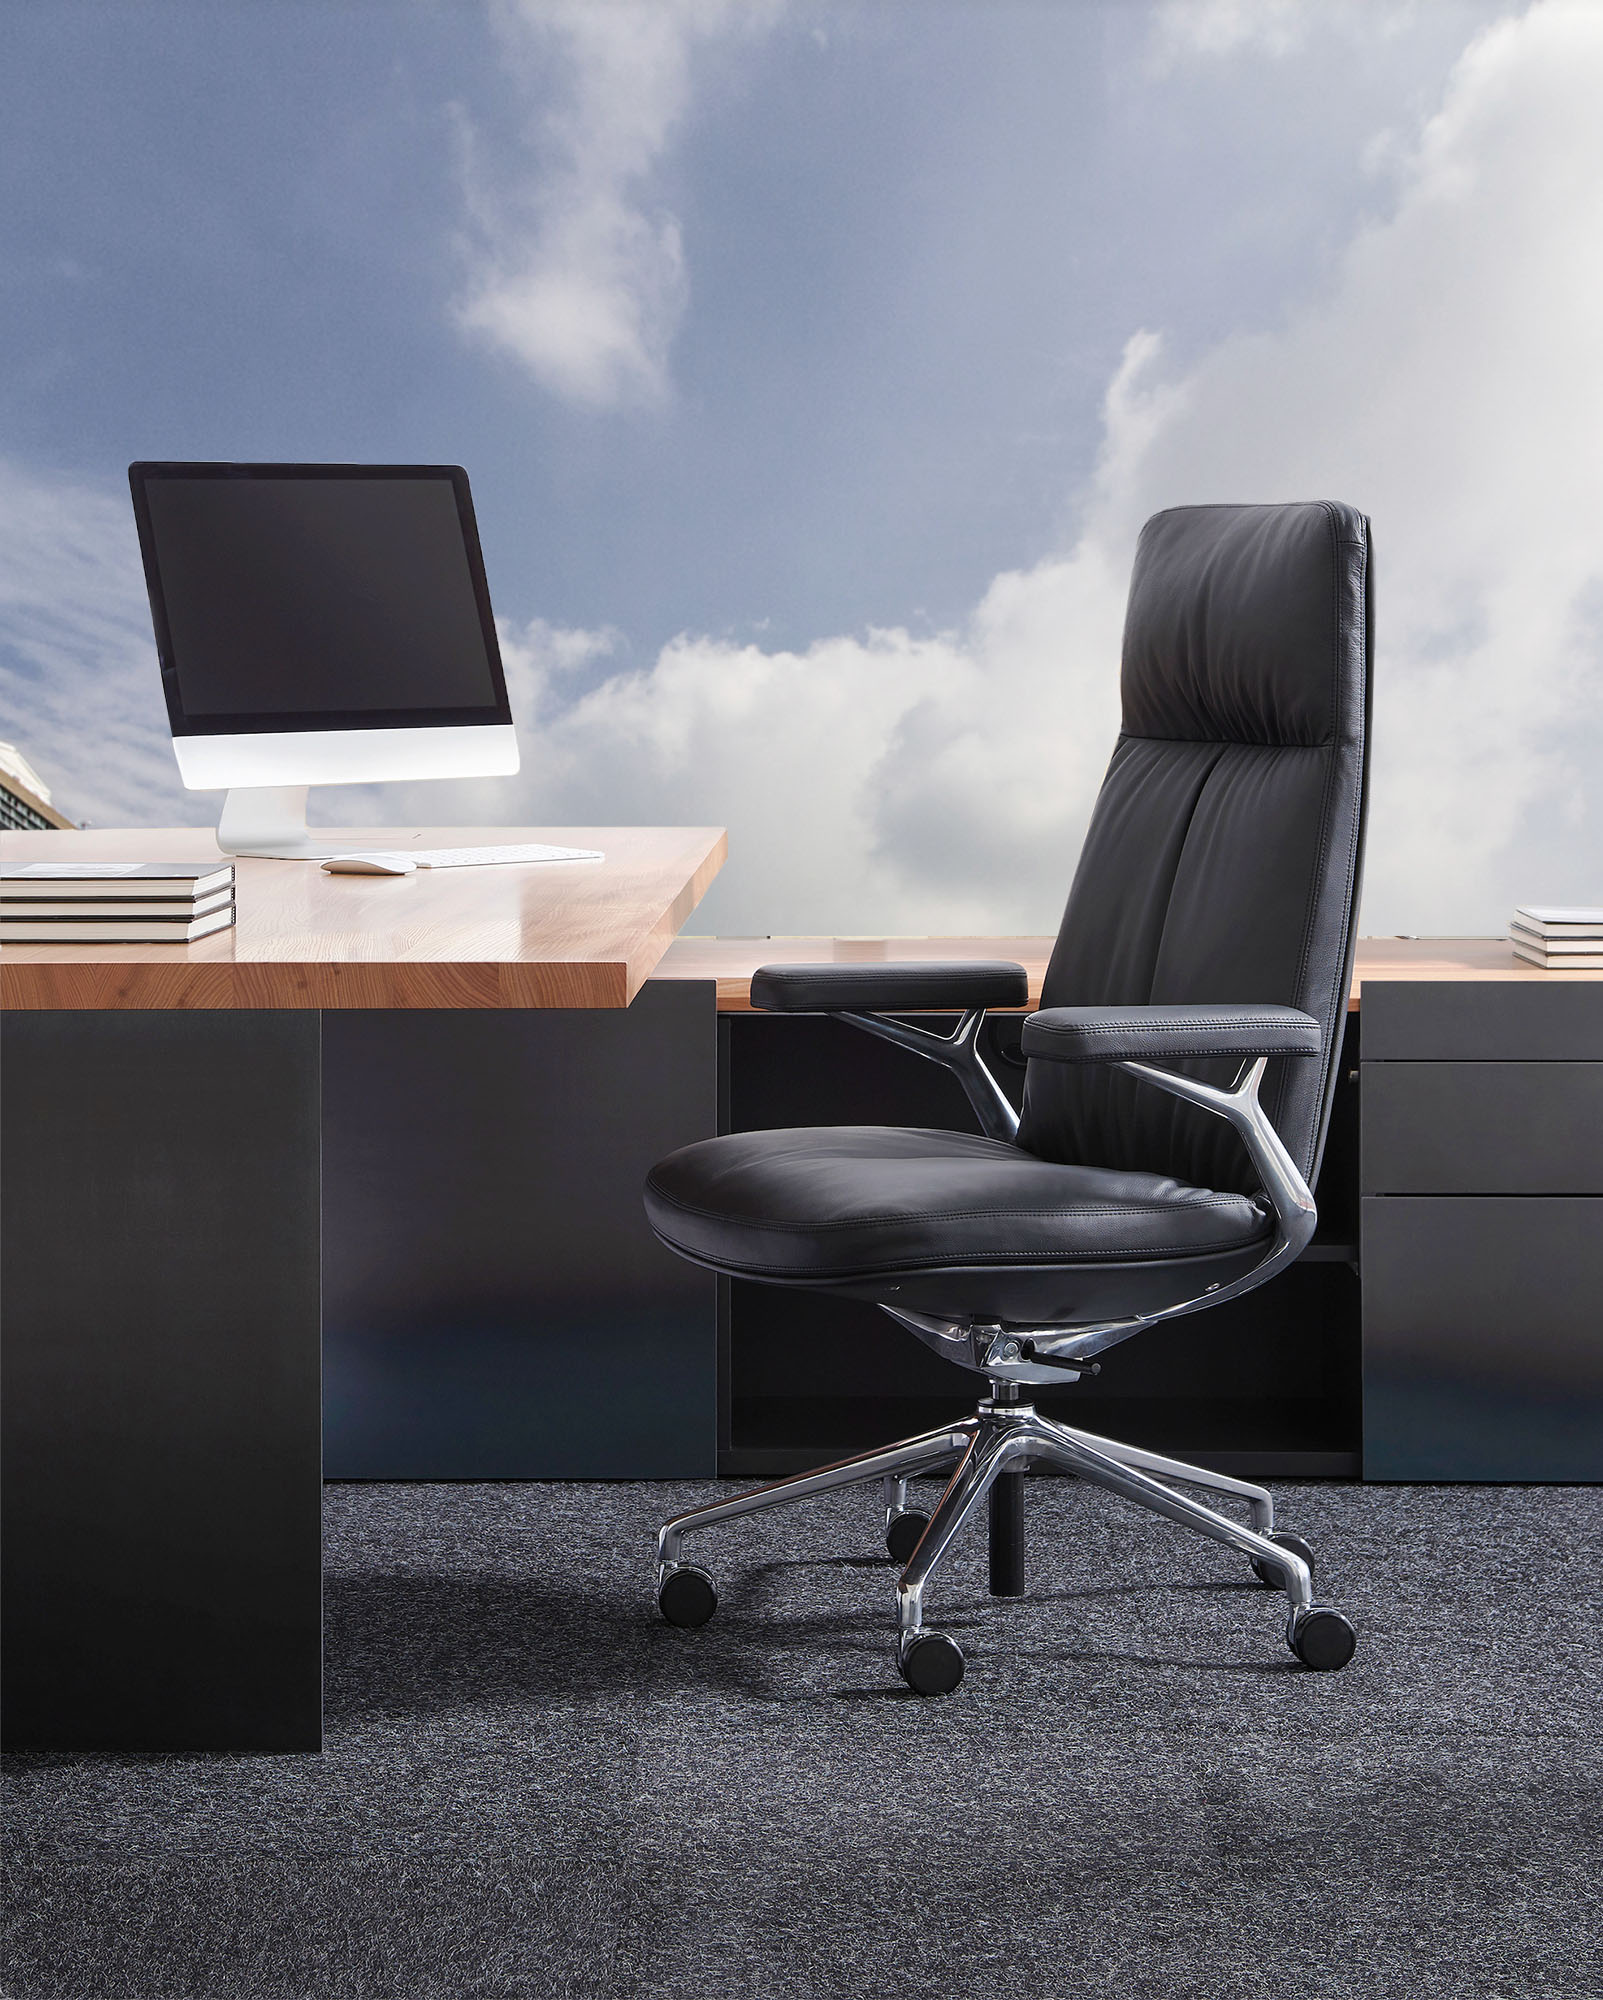 Ultra Posh Executive Platinum Chair Black Leather with aluminum base for desks and conference and home offices